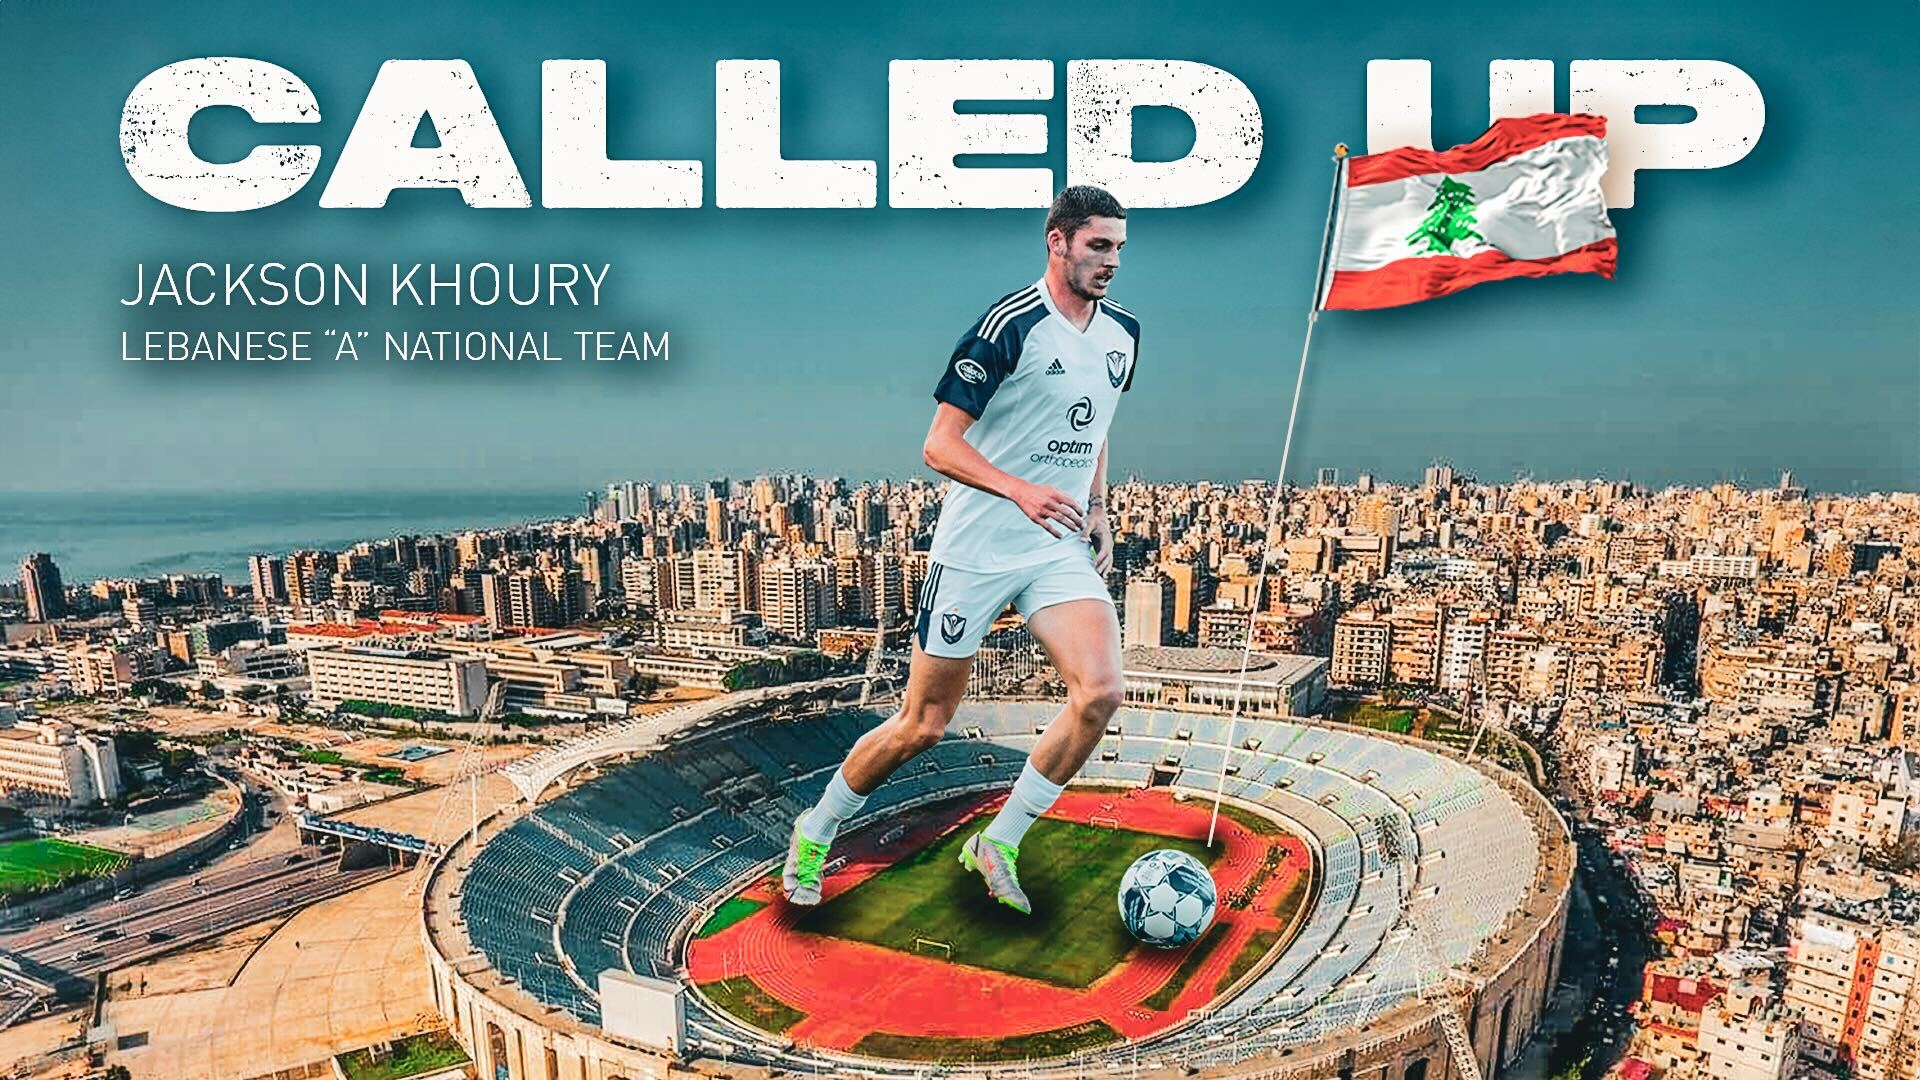 Jackson Khoury of Tormenta FC receives Lebanese "A" National Team Training Camp Call-Up featured image